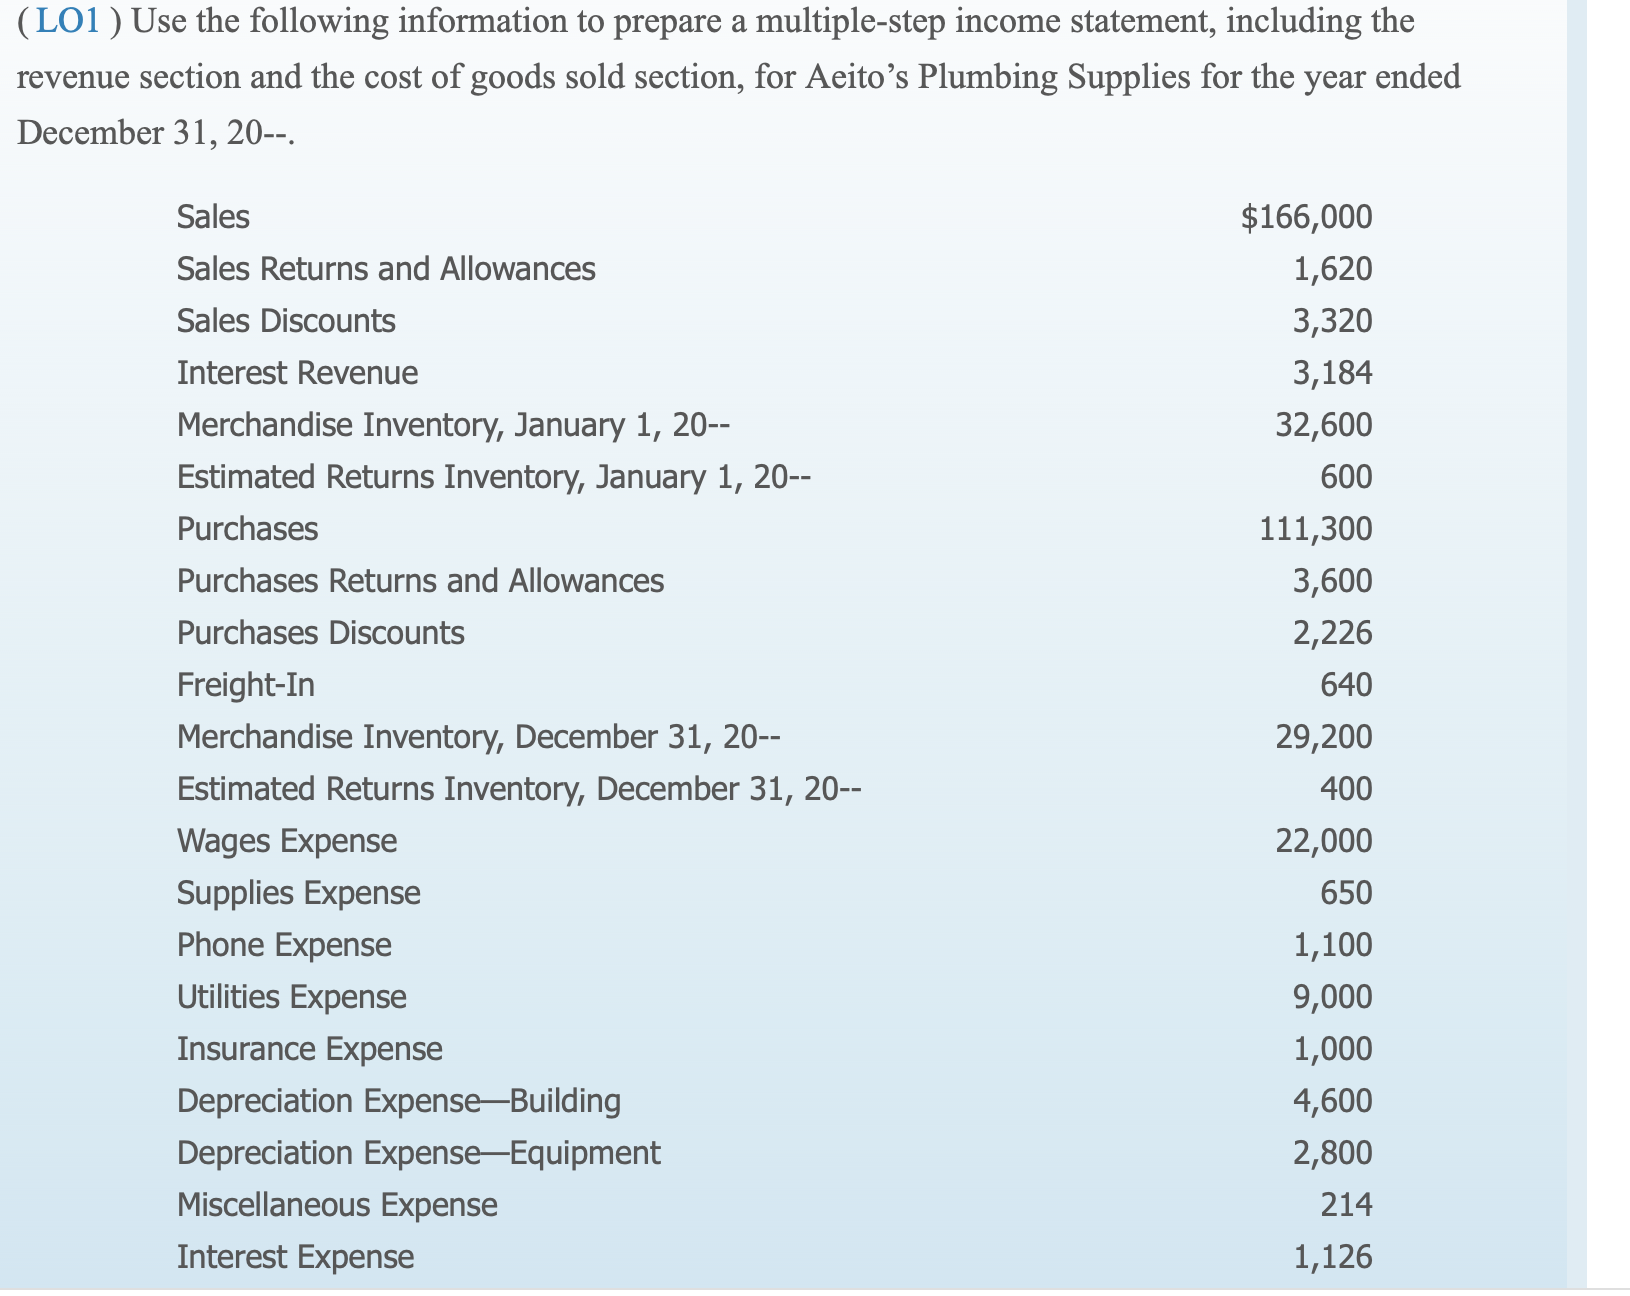 (LO1) Use the following information to prepare a multiple-step income statement, including the
revenue section and the cost of goods sold section, for Aeito's Plumbing Supplies for the
year
ended
December 31, 20--.
